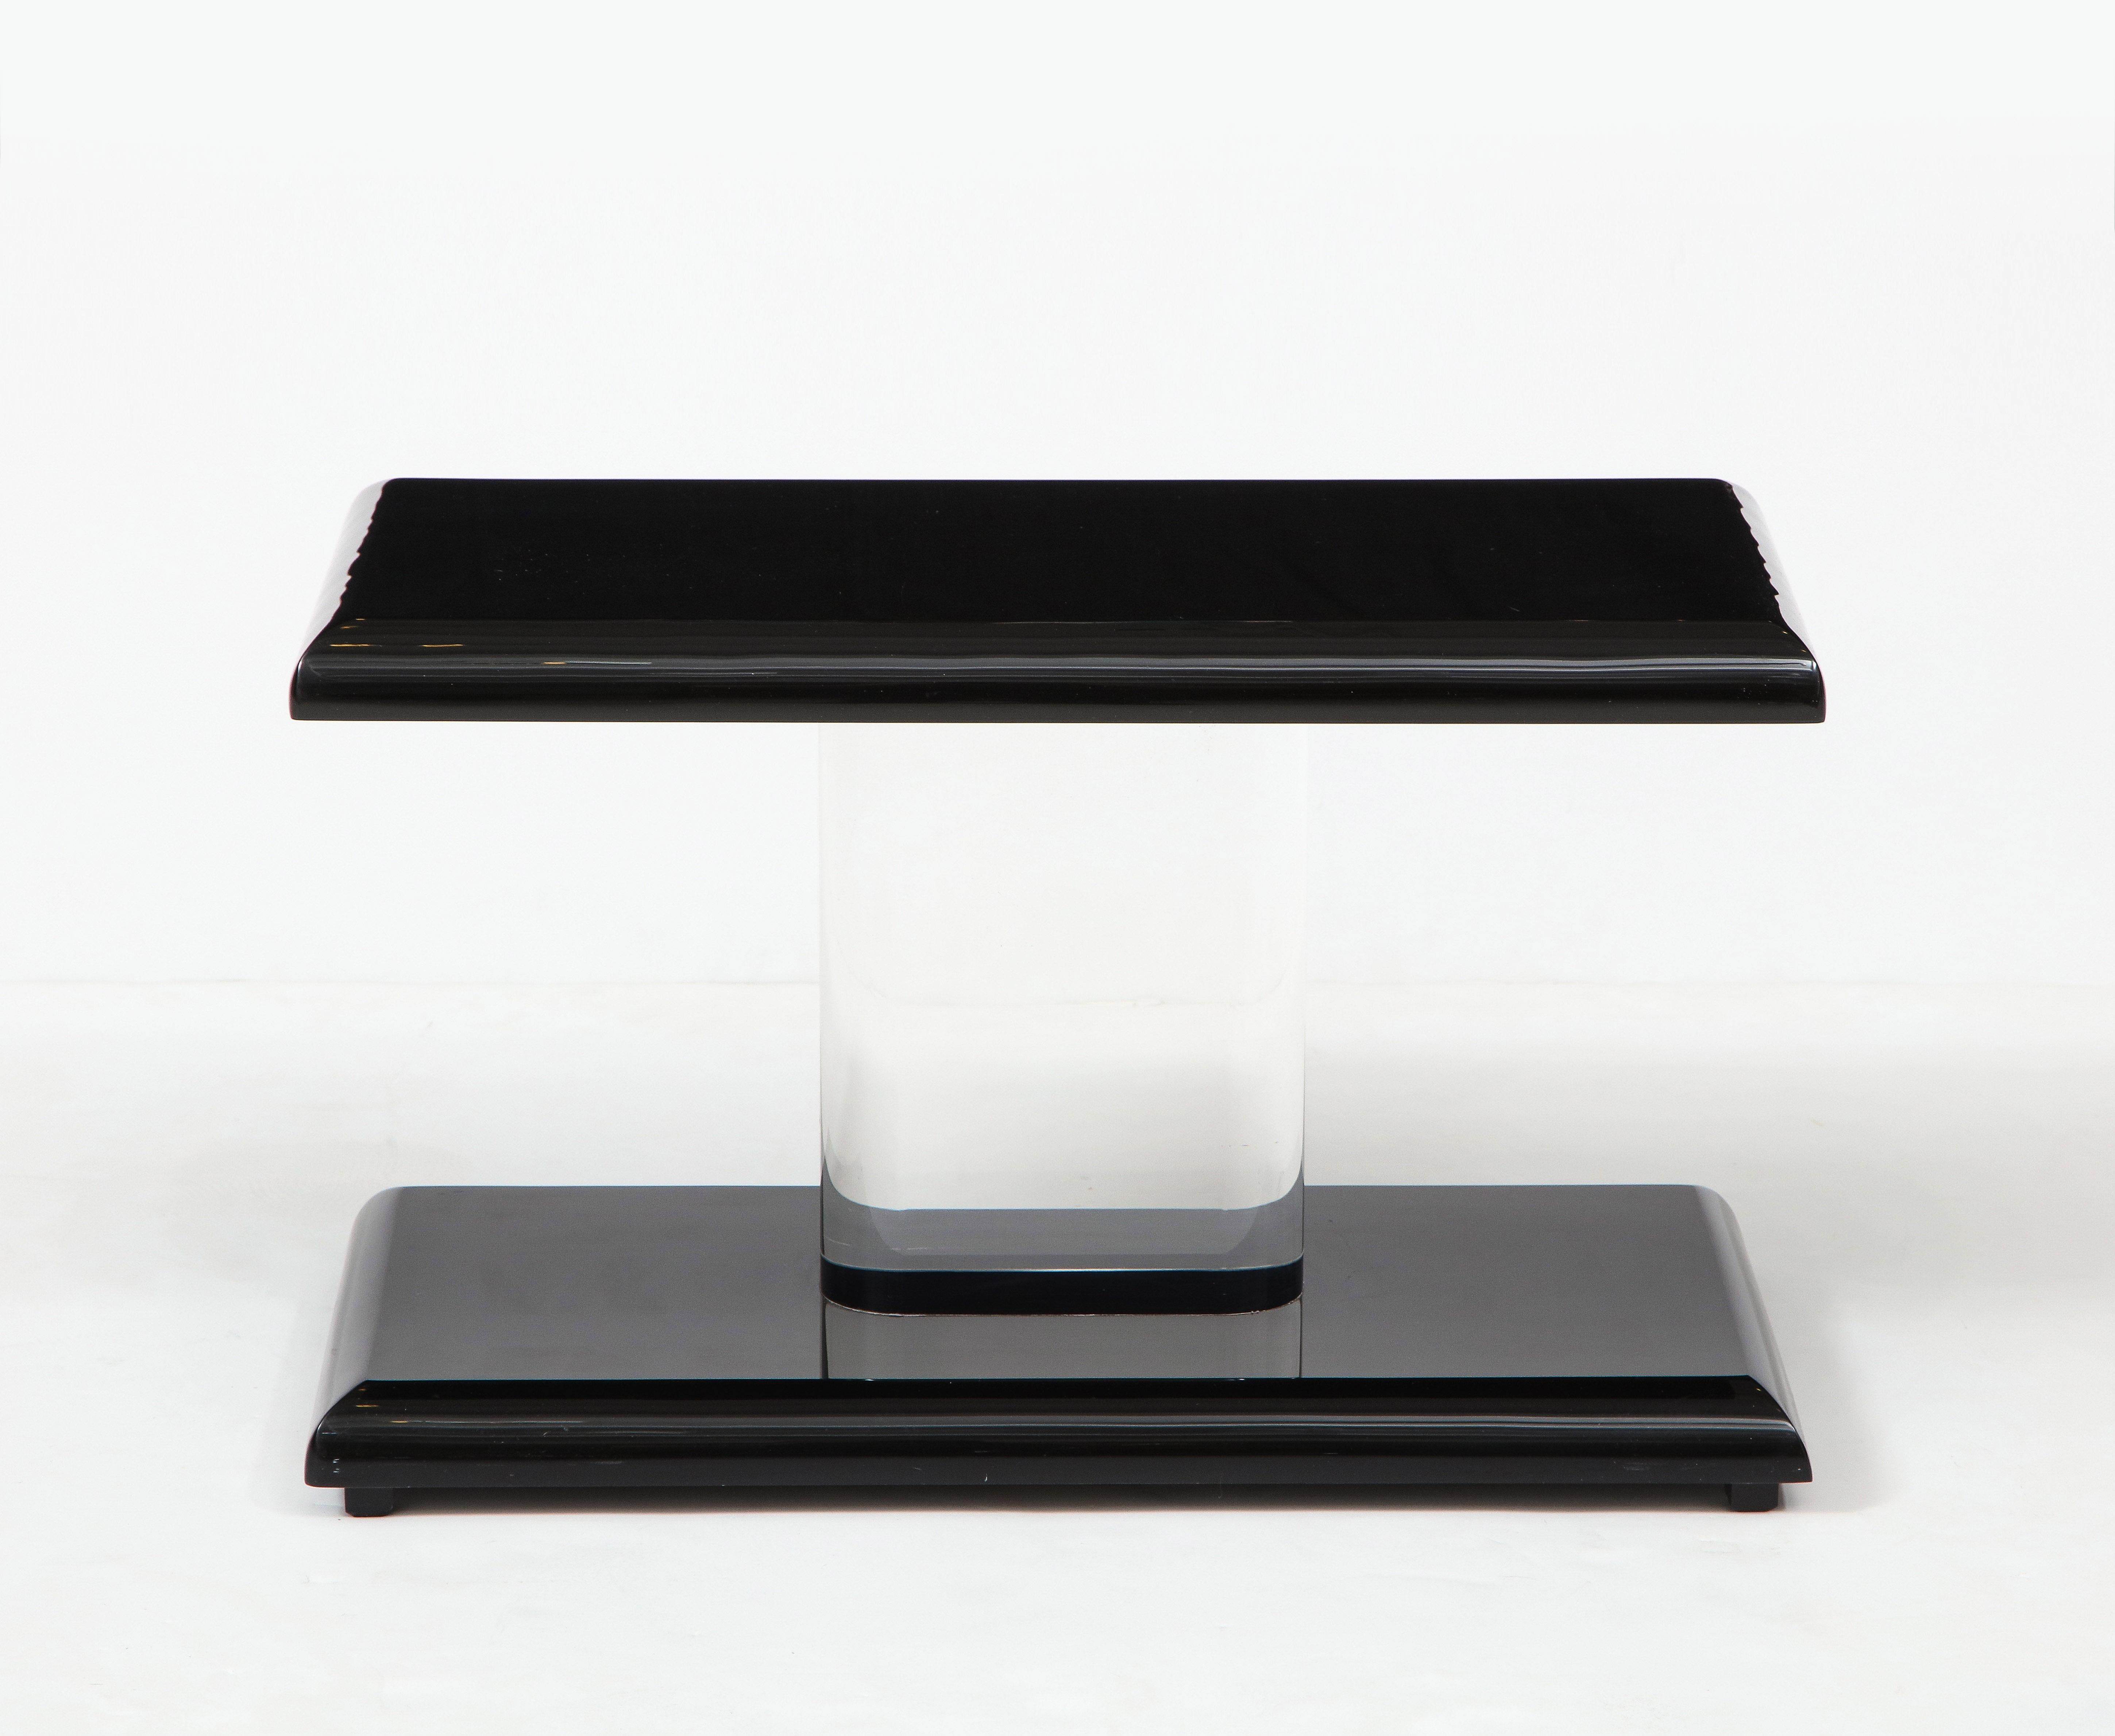 Pair of 1980's black acrylic and Lucite low side tables.
The bull nosed edge tops and bottoms are supported by a thick lucite column support.
The tables are in very good vintage condition with light age appropriate wear.
  